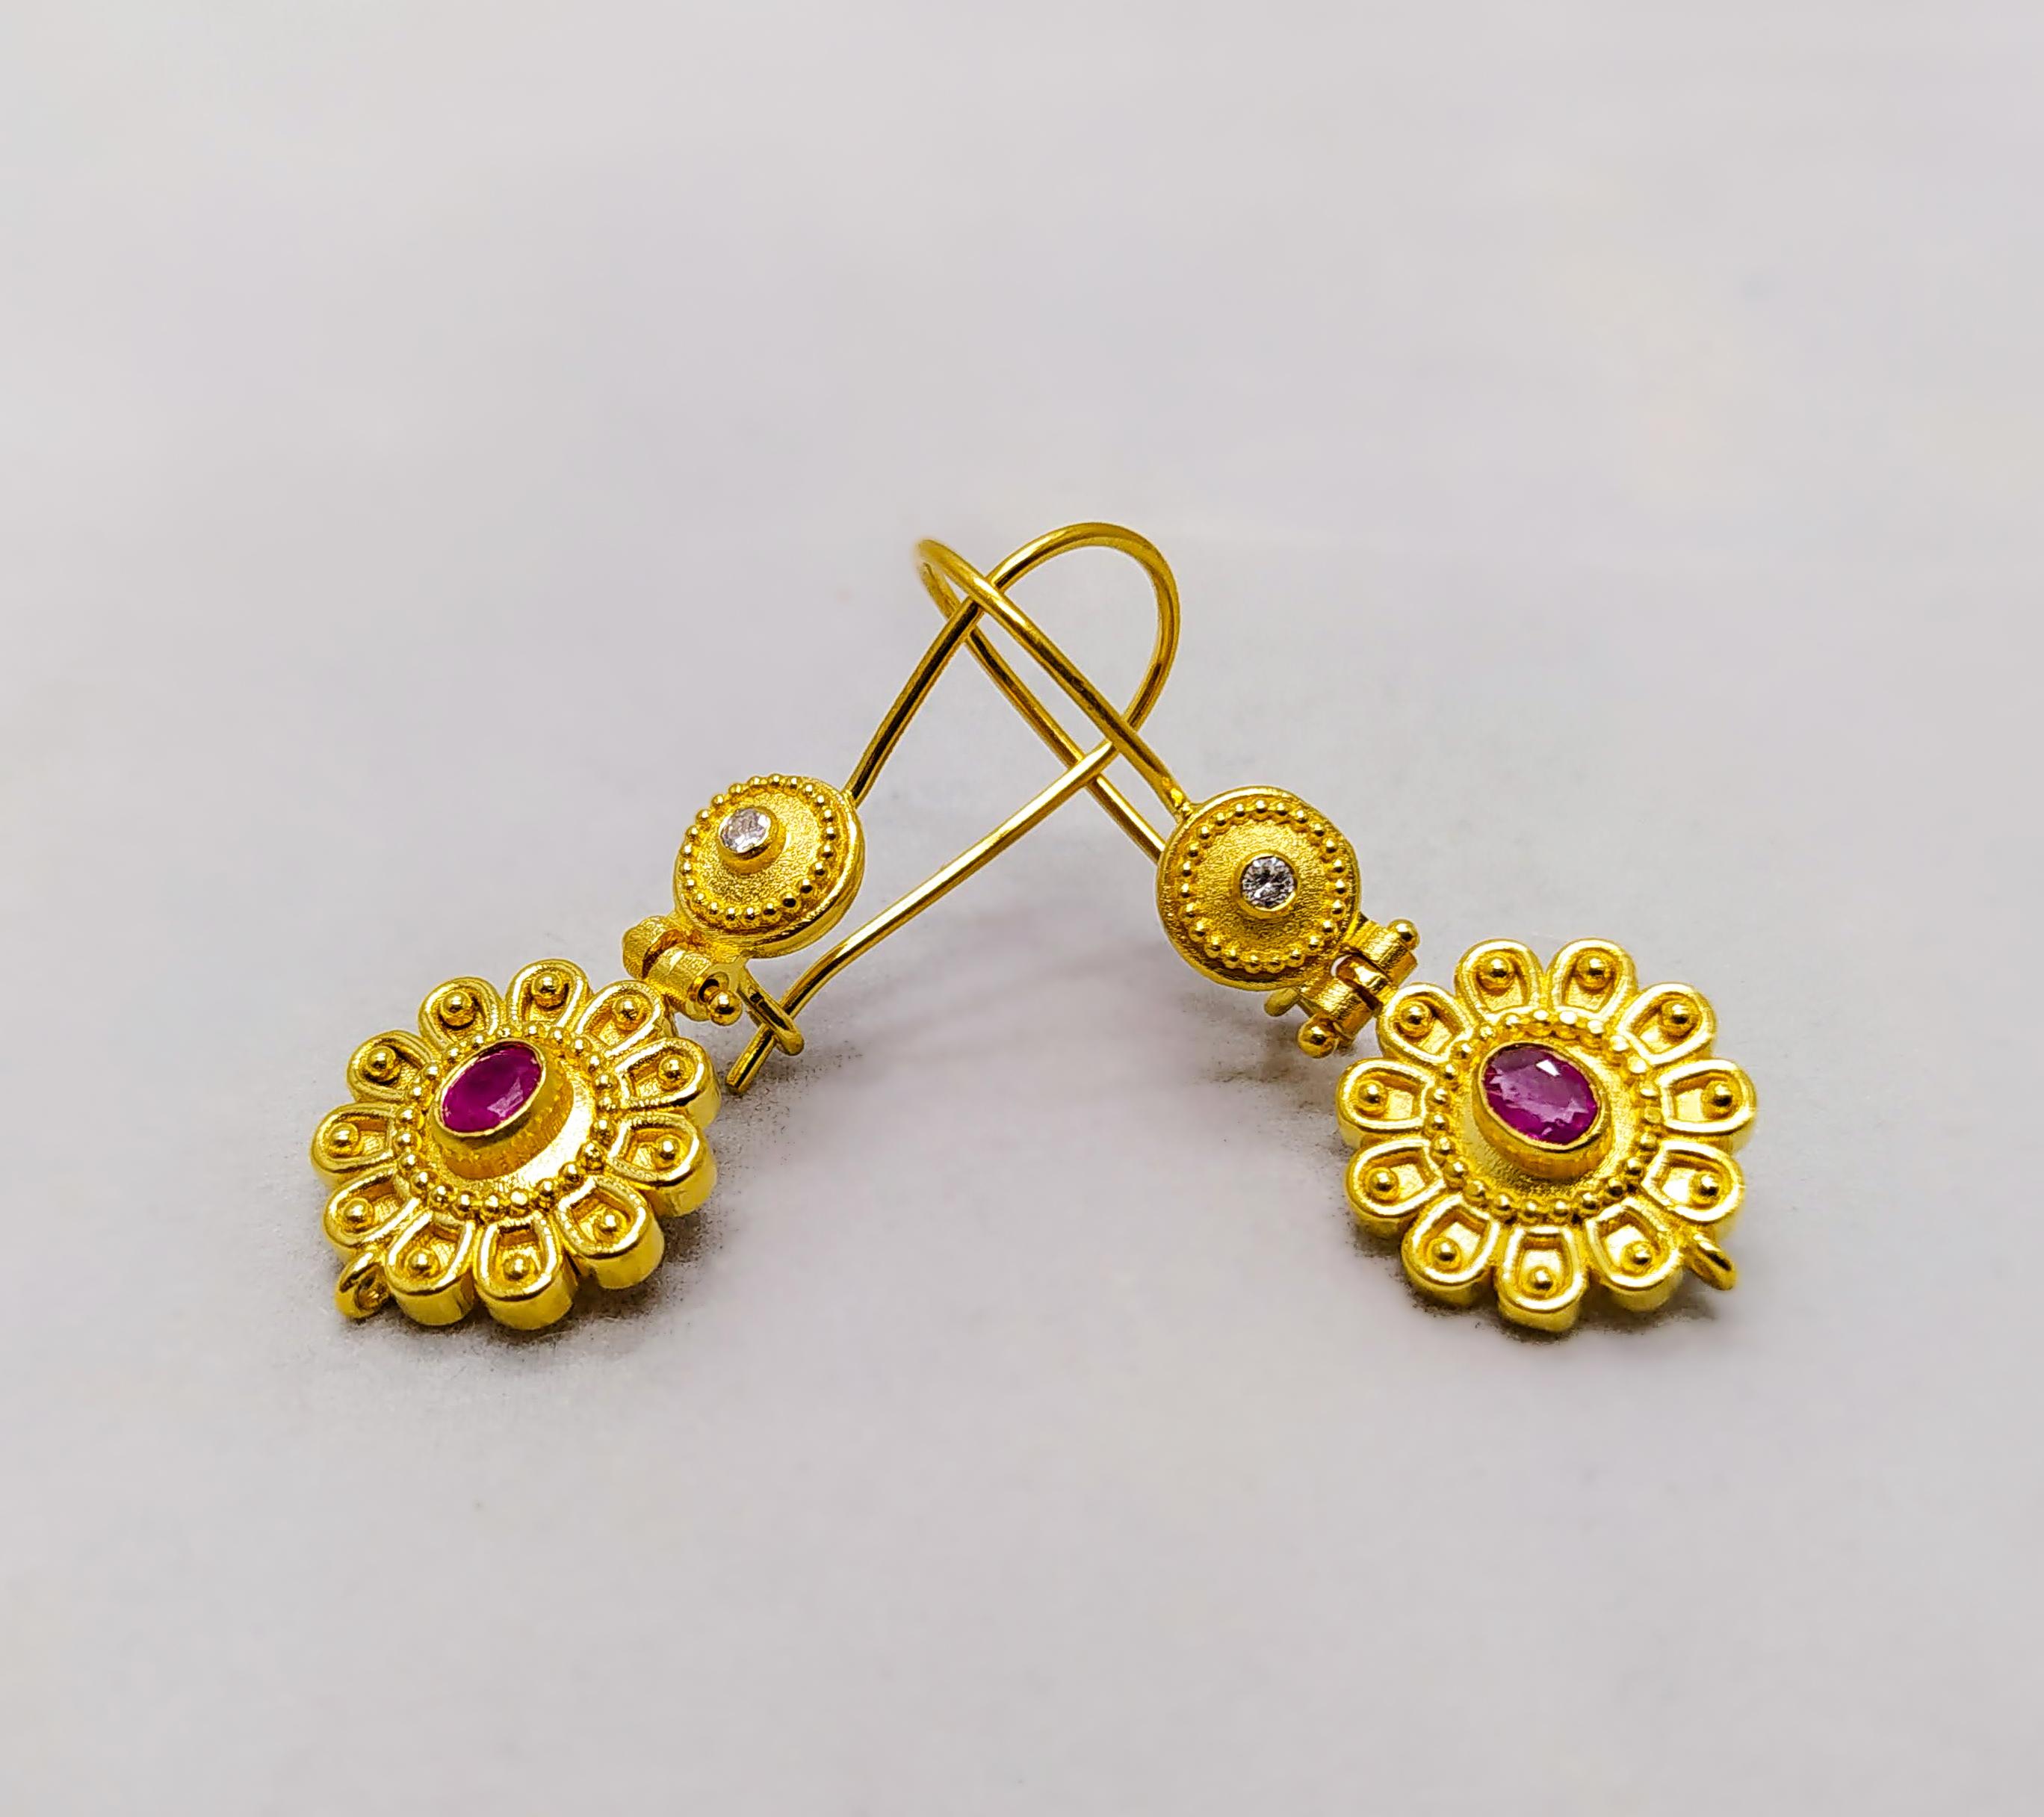 S.Georgios 18 Karat Yellow Gold gorgeous designer earrings are decorated with hand-made Byzantine-era style bead granulation workmanship done all microscopically and finished with a unique velvet background. These beautiful floral earrings feature 2